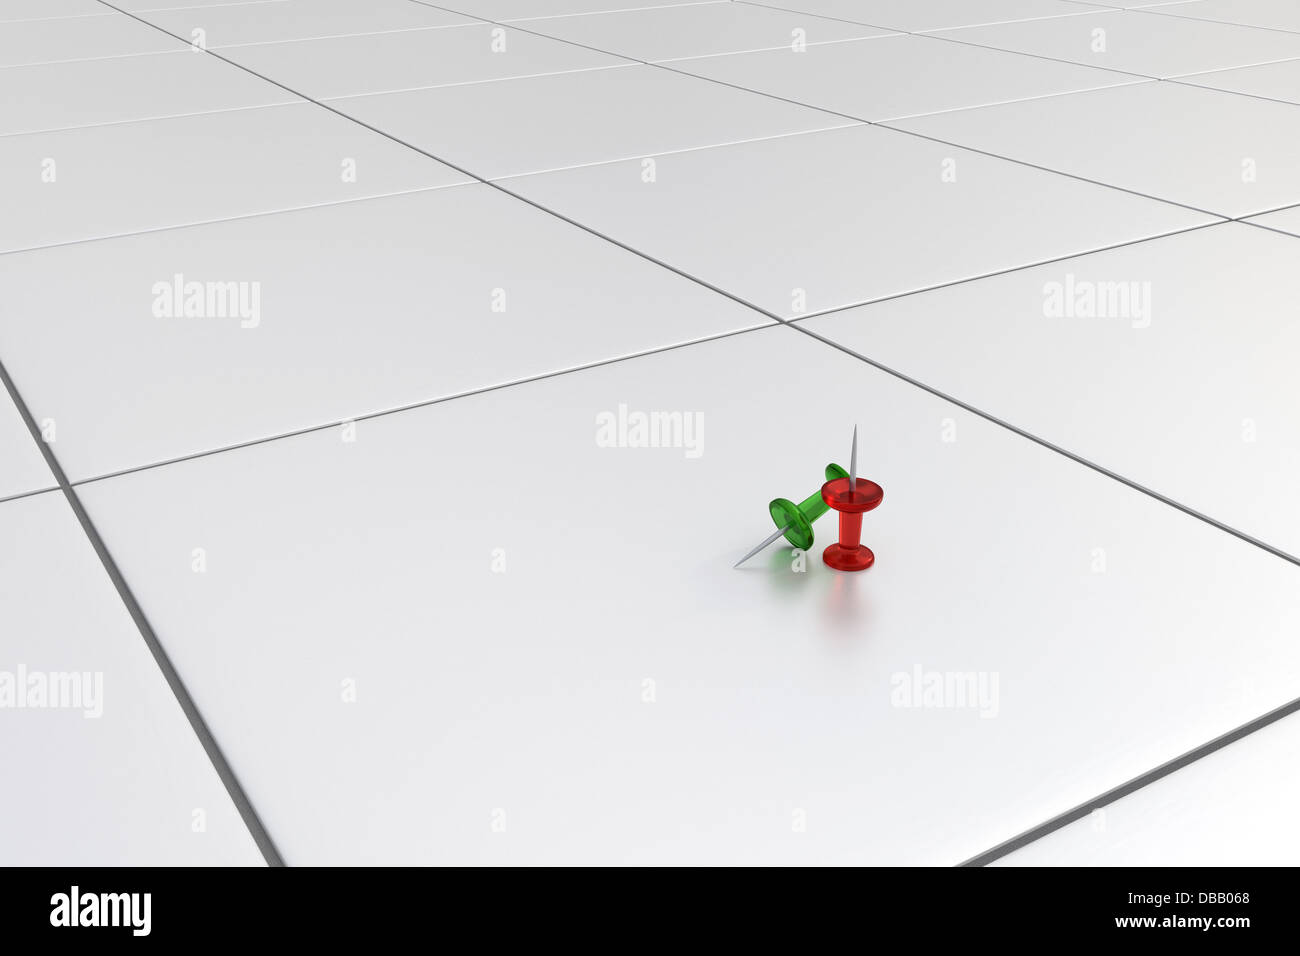 Household Accidents - 3D Thumbtacks (Red And Green) Stock Photo